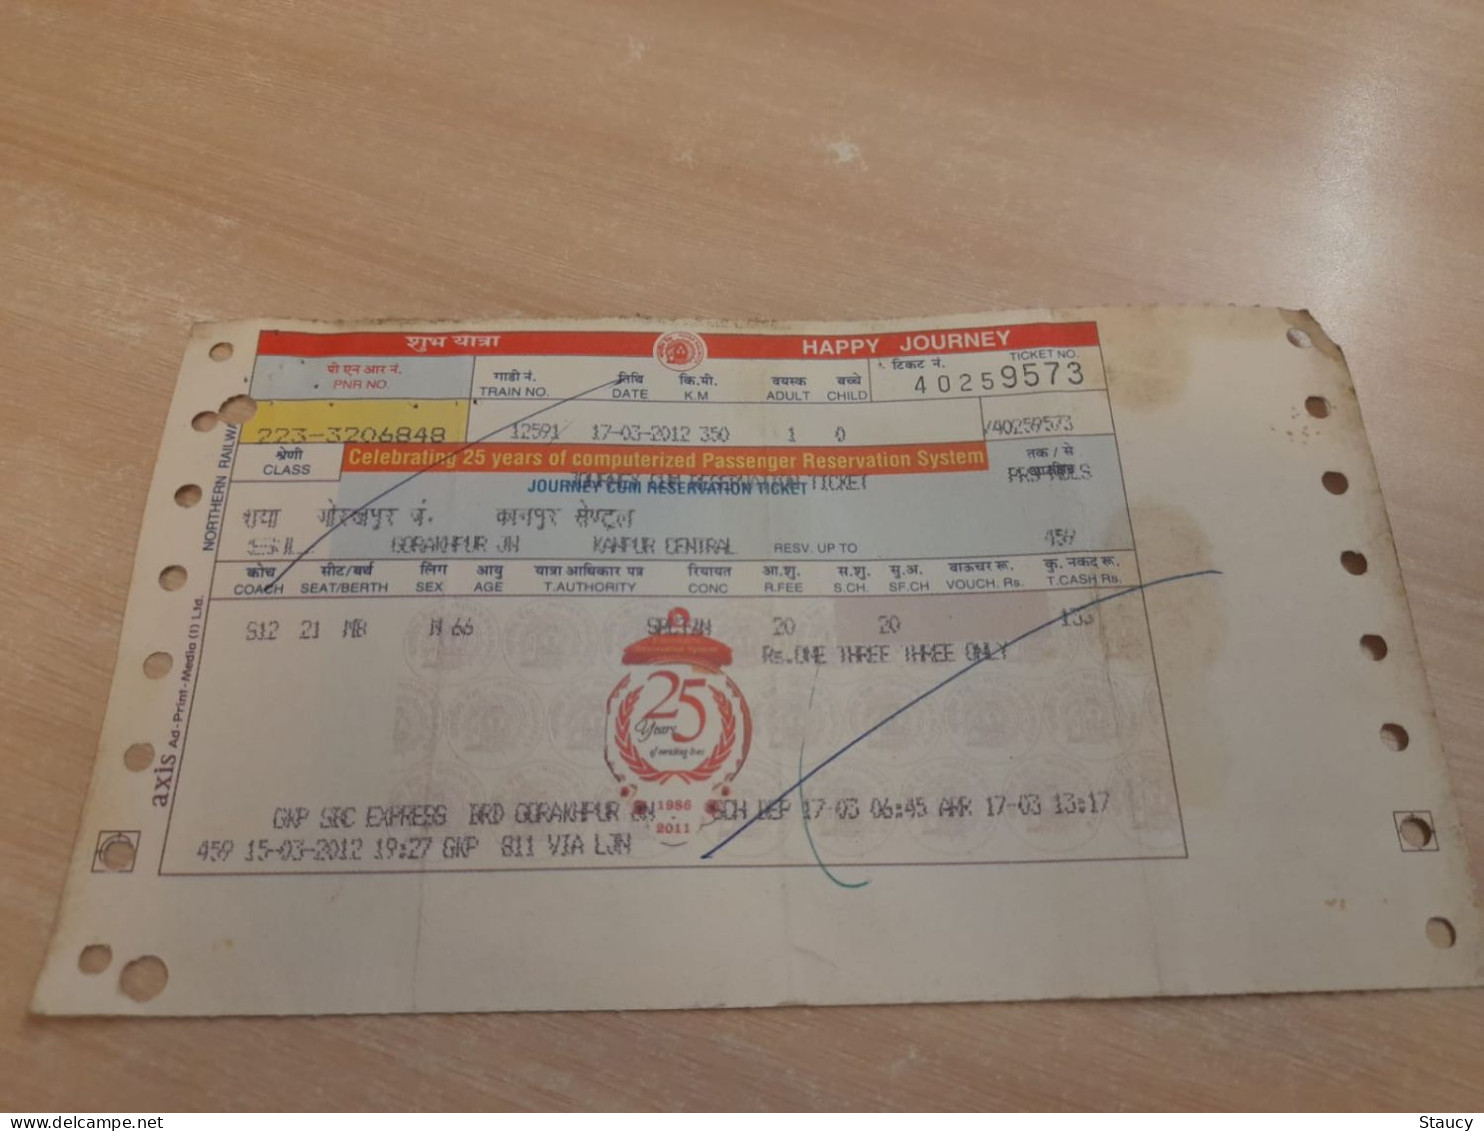 India Old / Vintage - Railway / Train Special Ticket "NORTHERN RAILWAY" Celebrating 25 Years Of C.P.R.System As Per Scan - Wereld